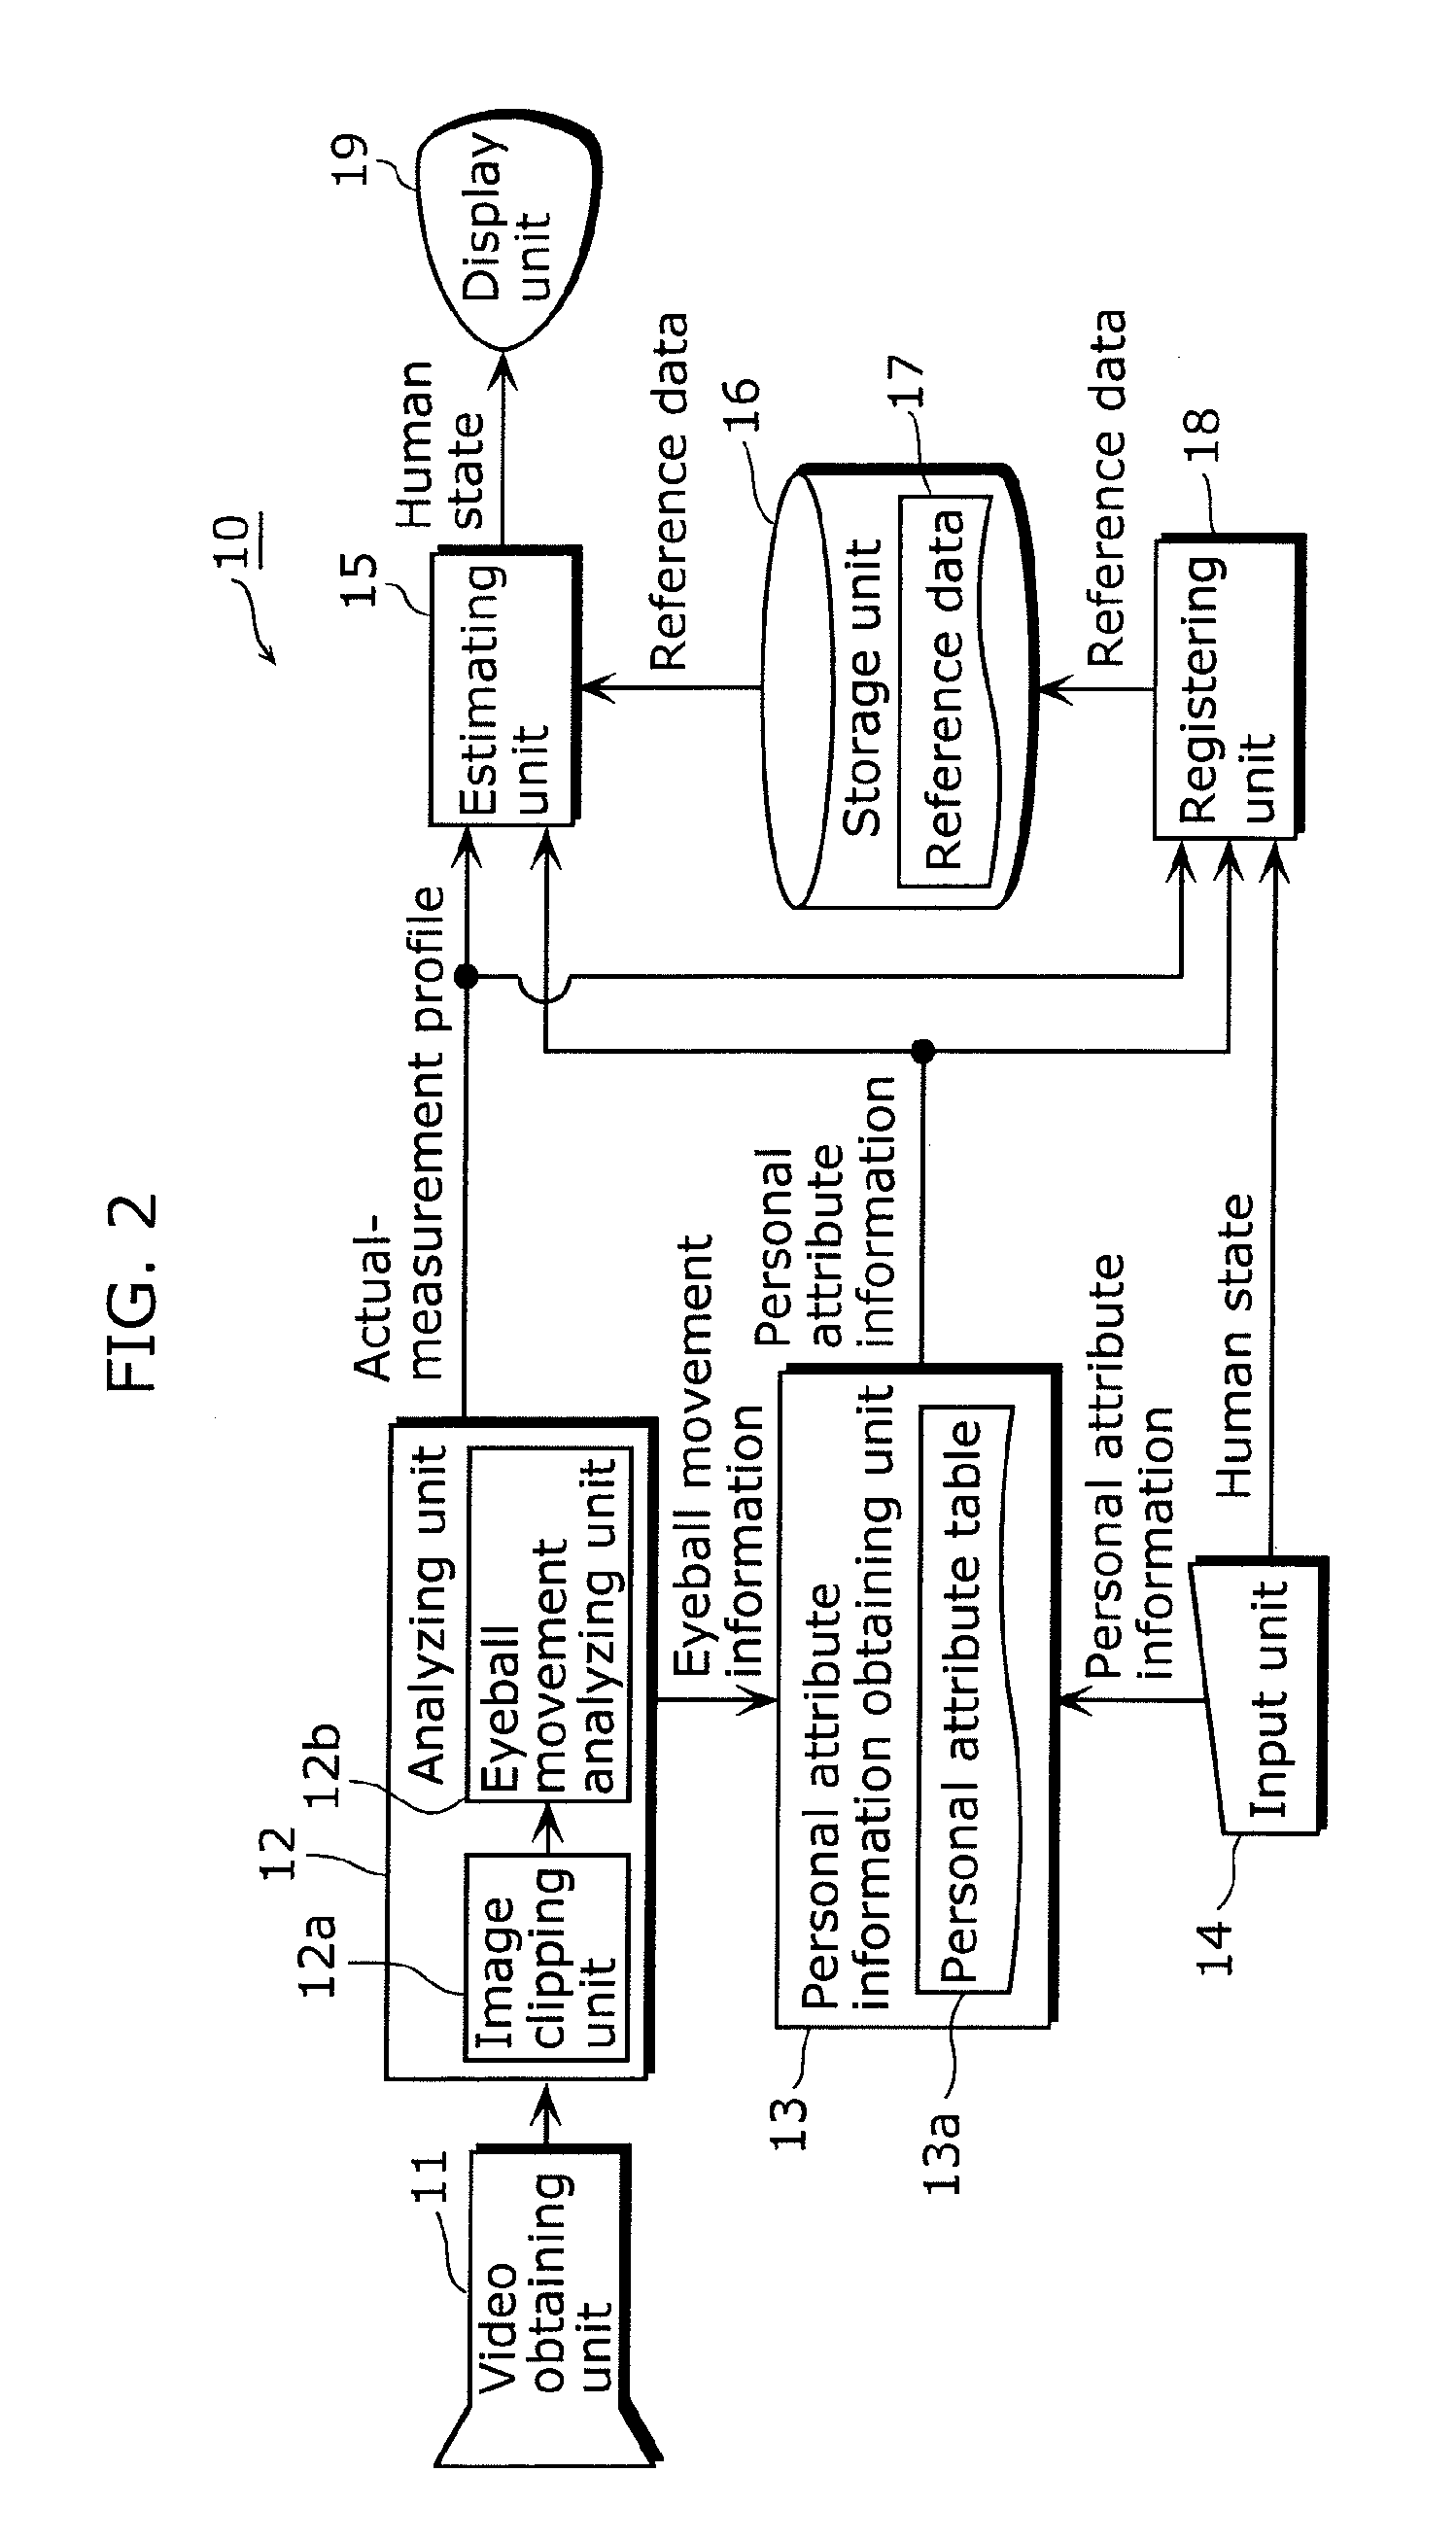 Human state estimating device and method